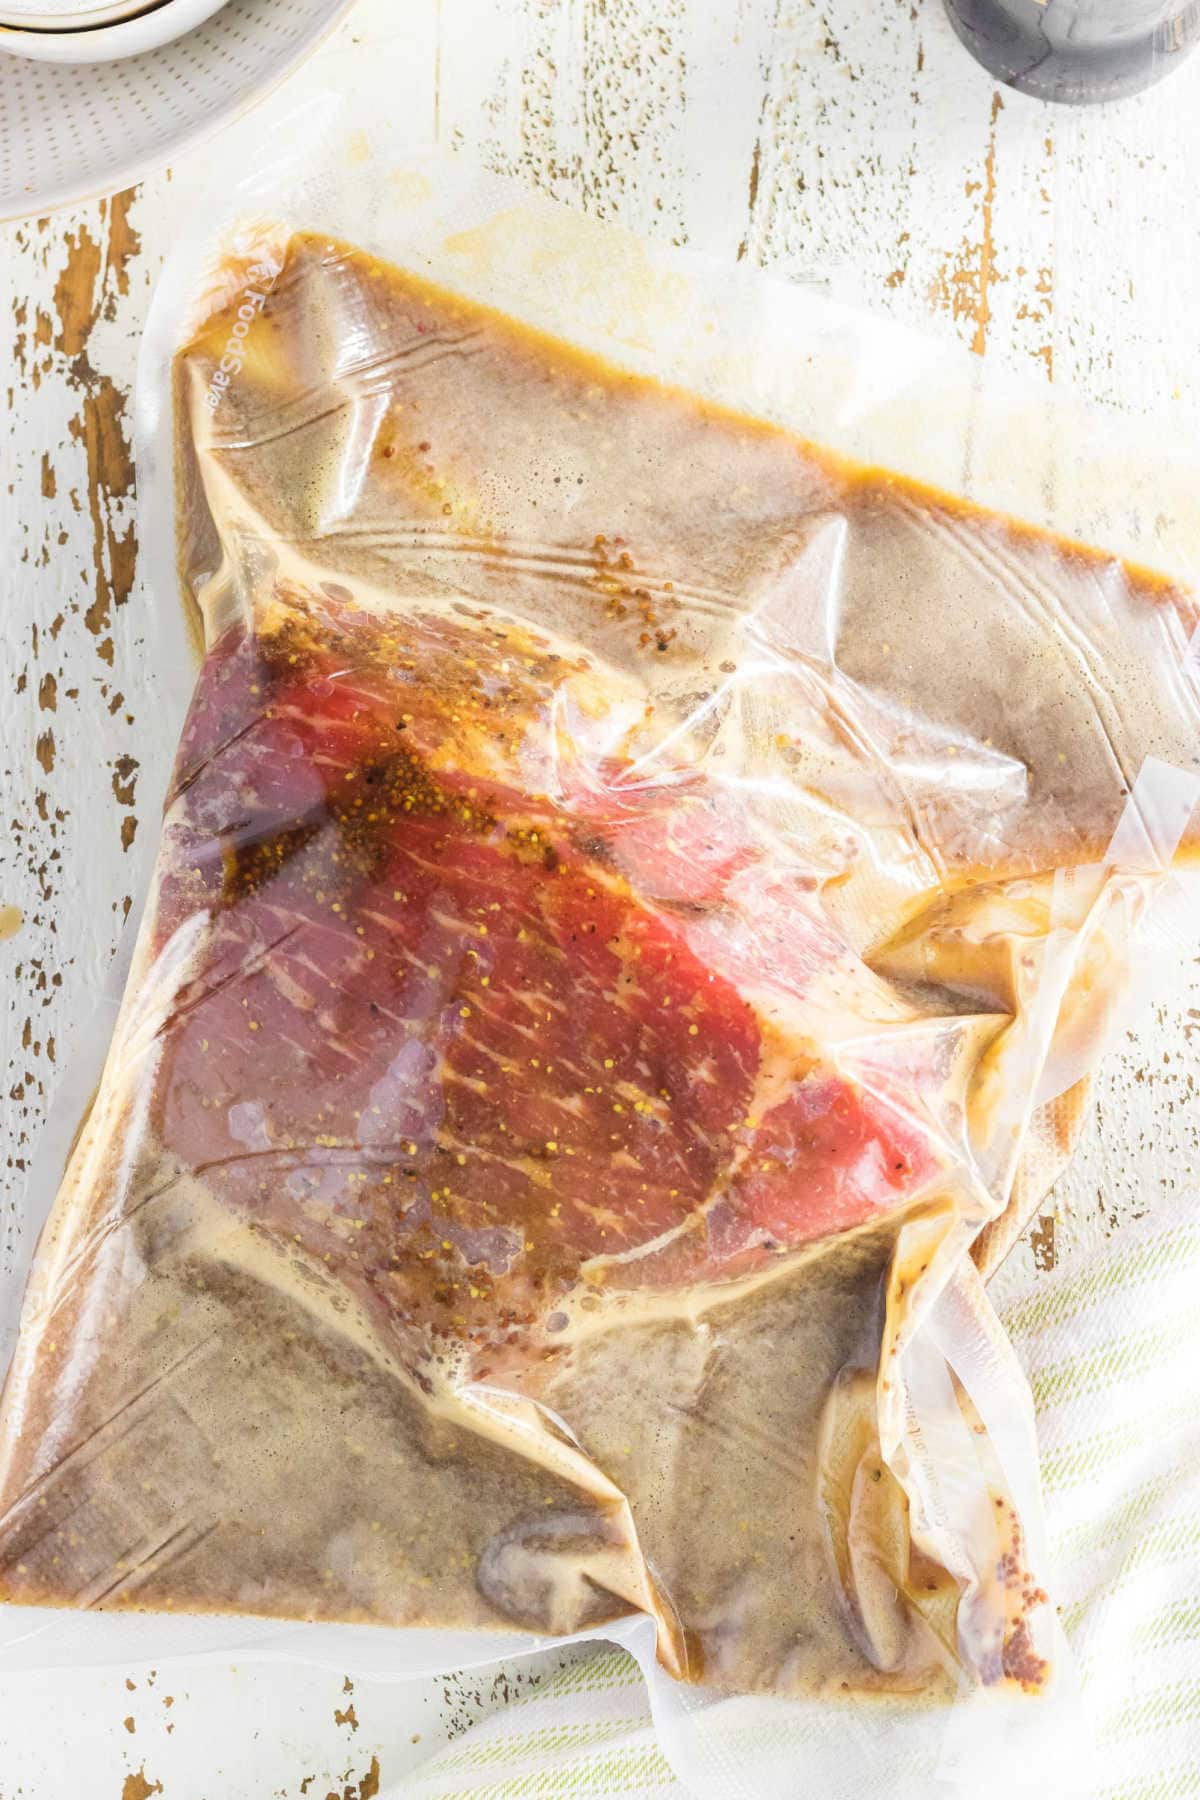 The bottom round roast and marinade in a plastic bag.